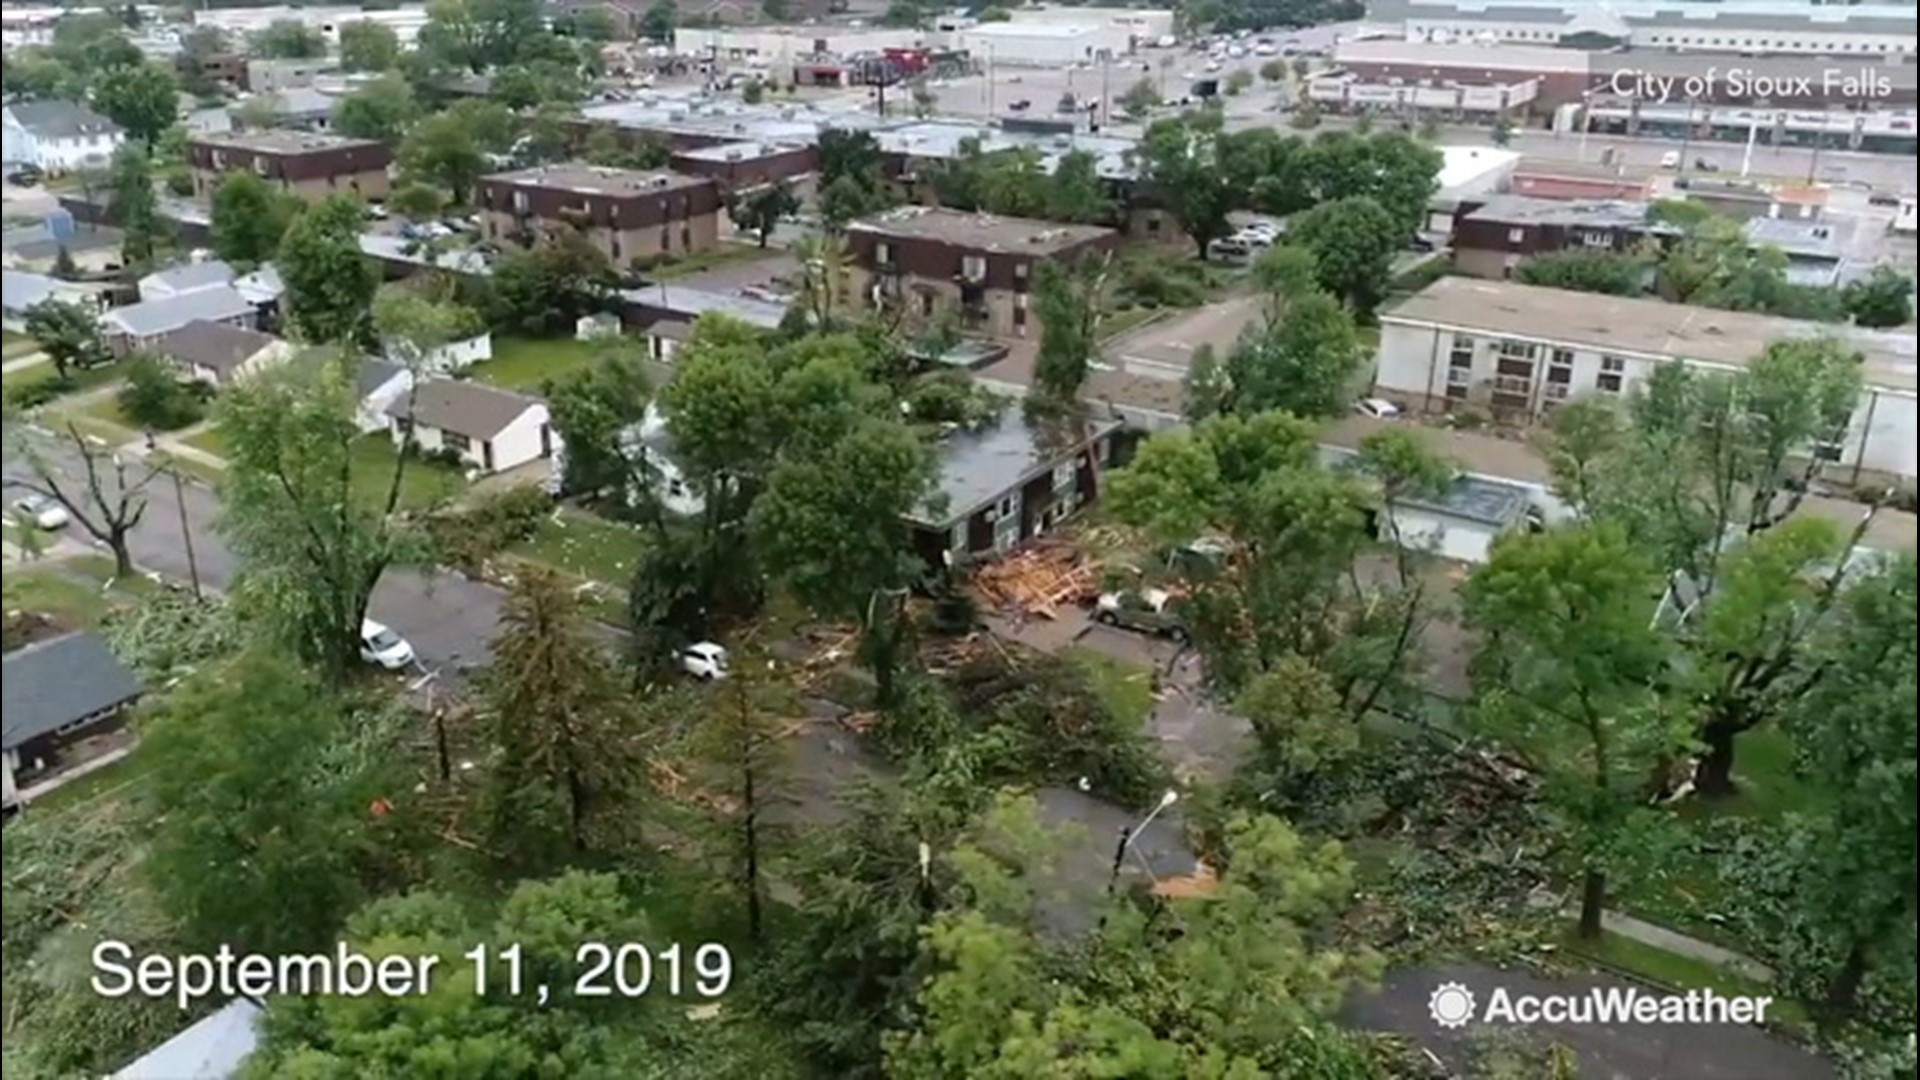 Less than one week after a tornado in Sioux Falls, South Dakota, cleanup efforts have progressed tremendously by Sept. 17. The City of Sioux Fall's twitter page thanked the army of volunteers, city crews and contractors for this quick and effective cleanup.